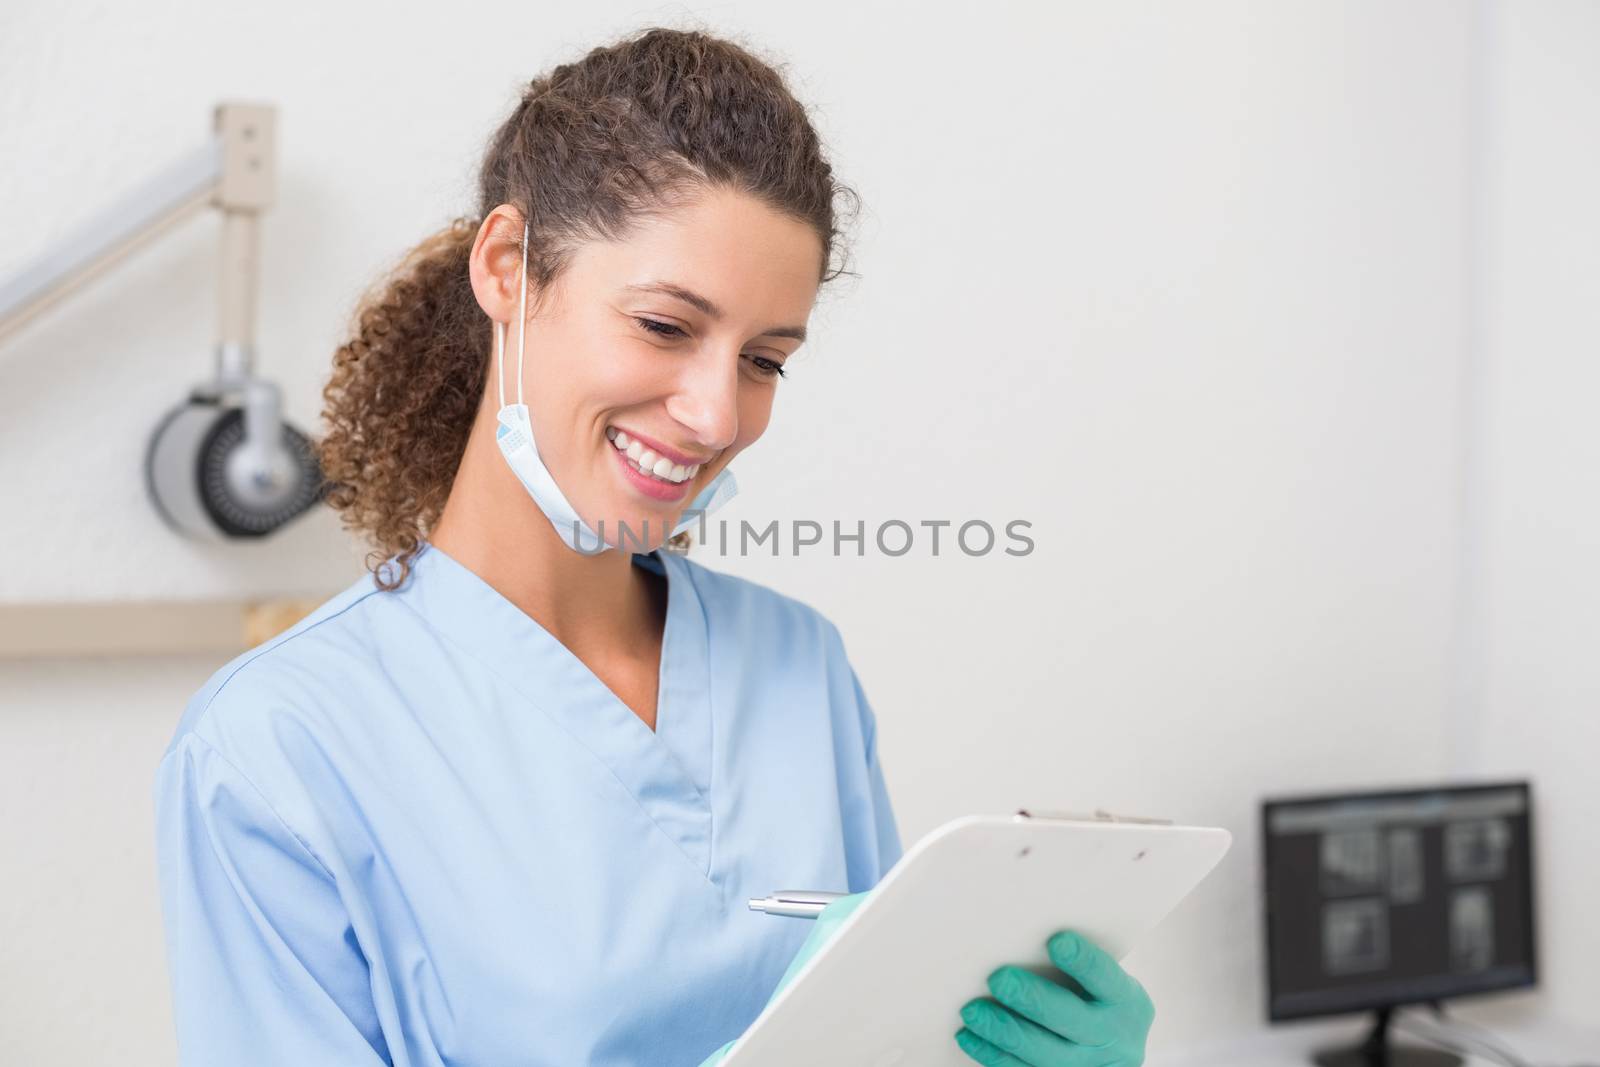 Dentist in blue scrubs writing on clipboard at the dental clinic